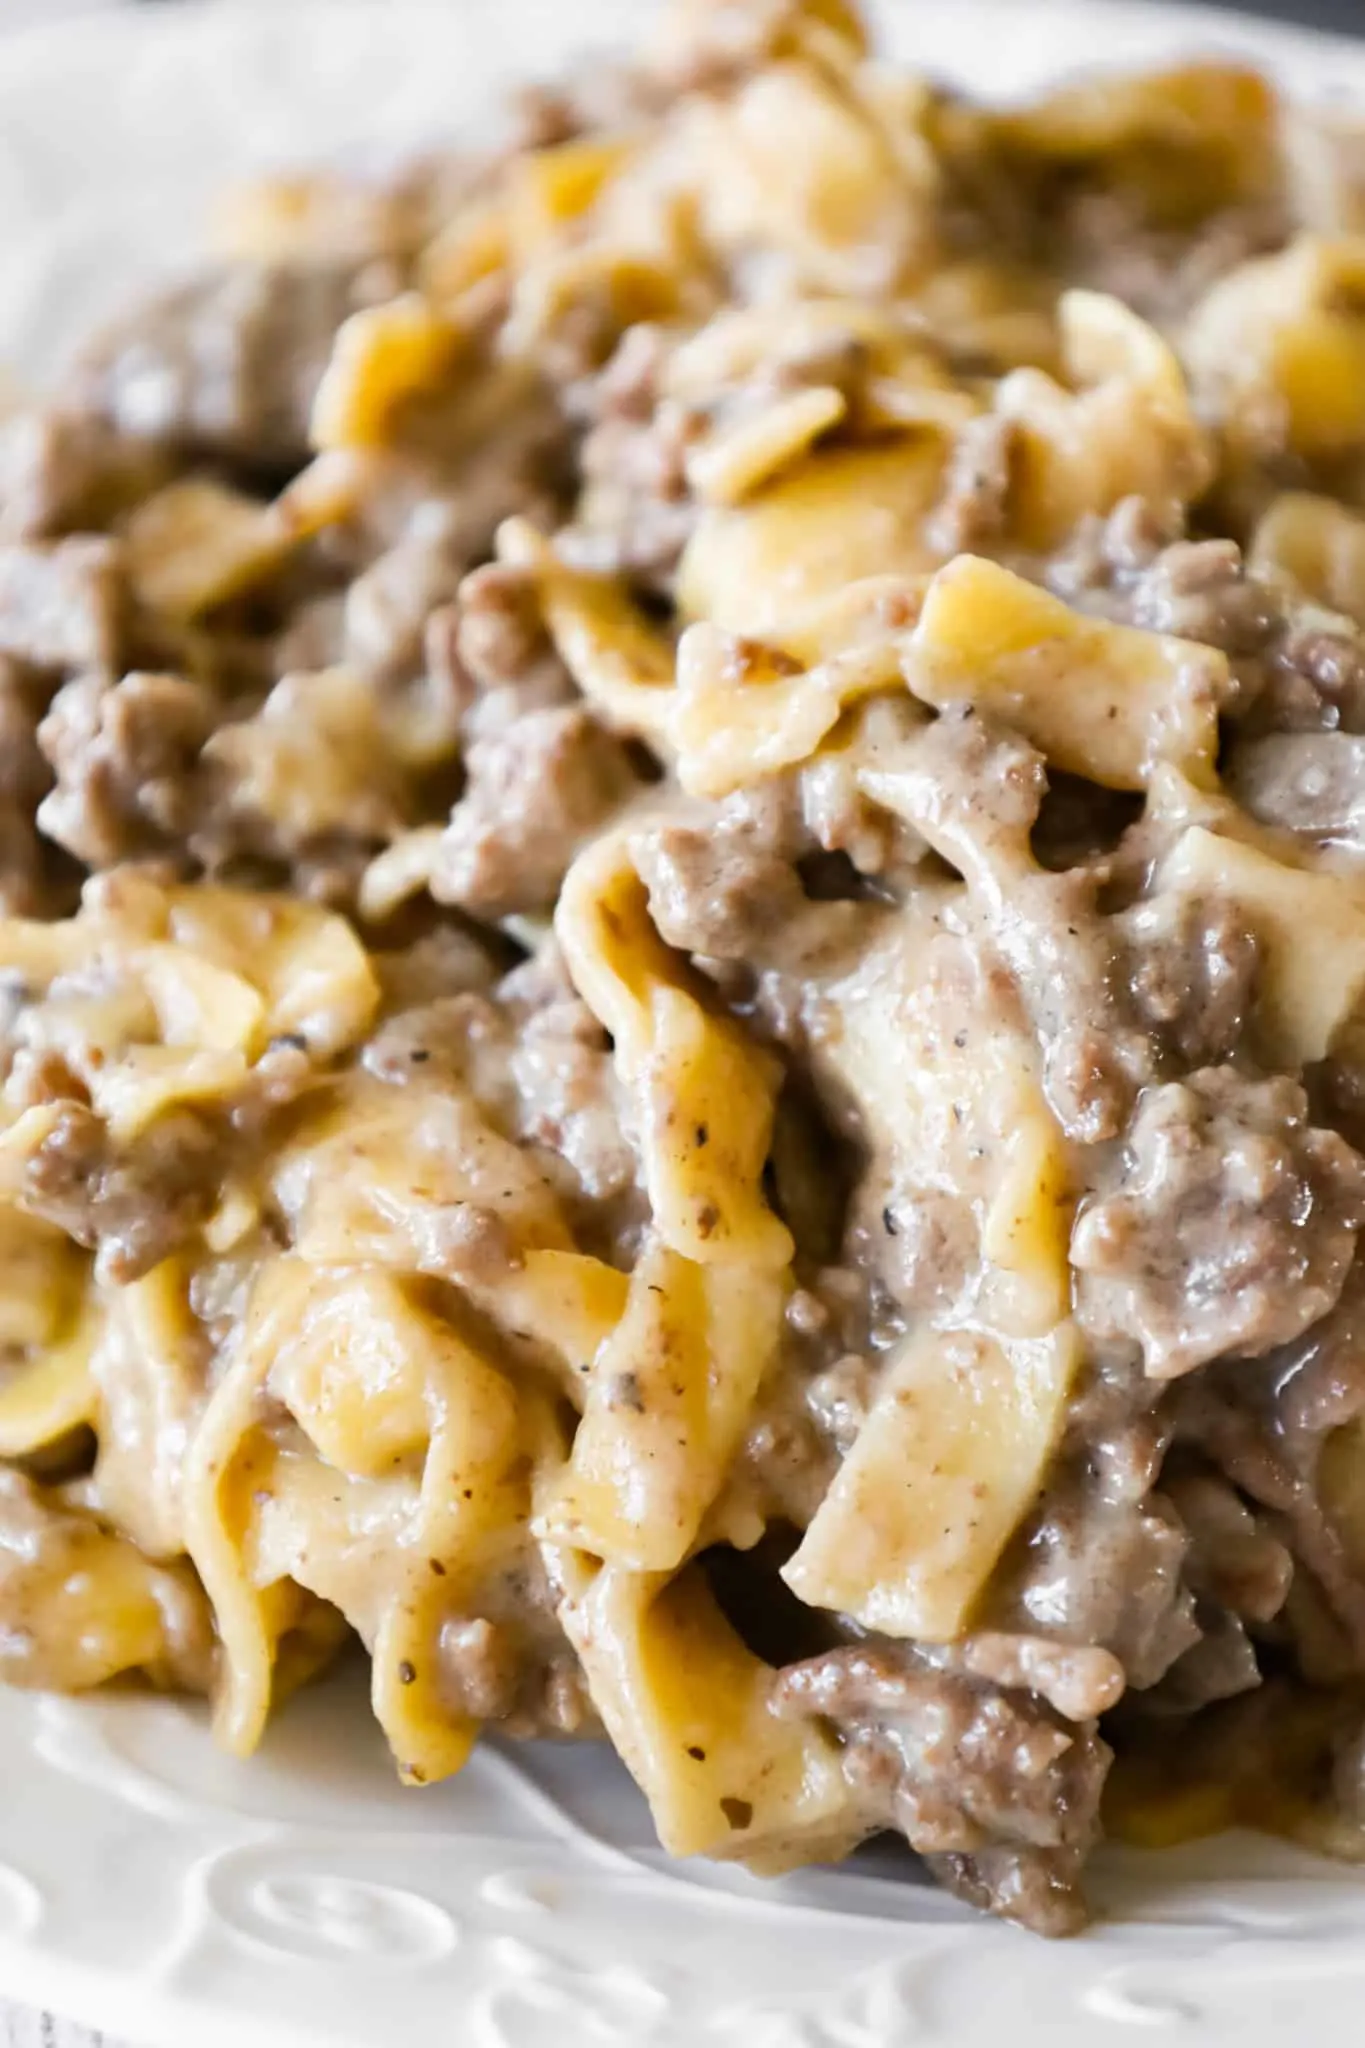 Crock Pot Beef and Noodles is an easy slow cooker dinner recipe loaded with ground beef and egg noodles cooked in a sauce made from beef broth and cream of mushroom soup.